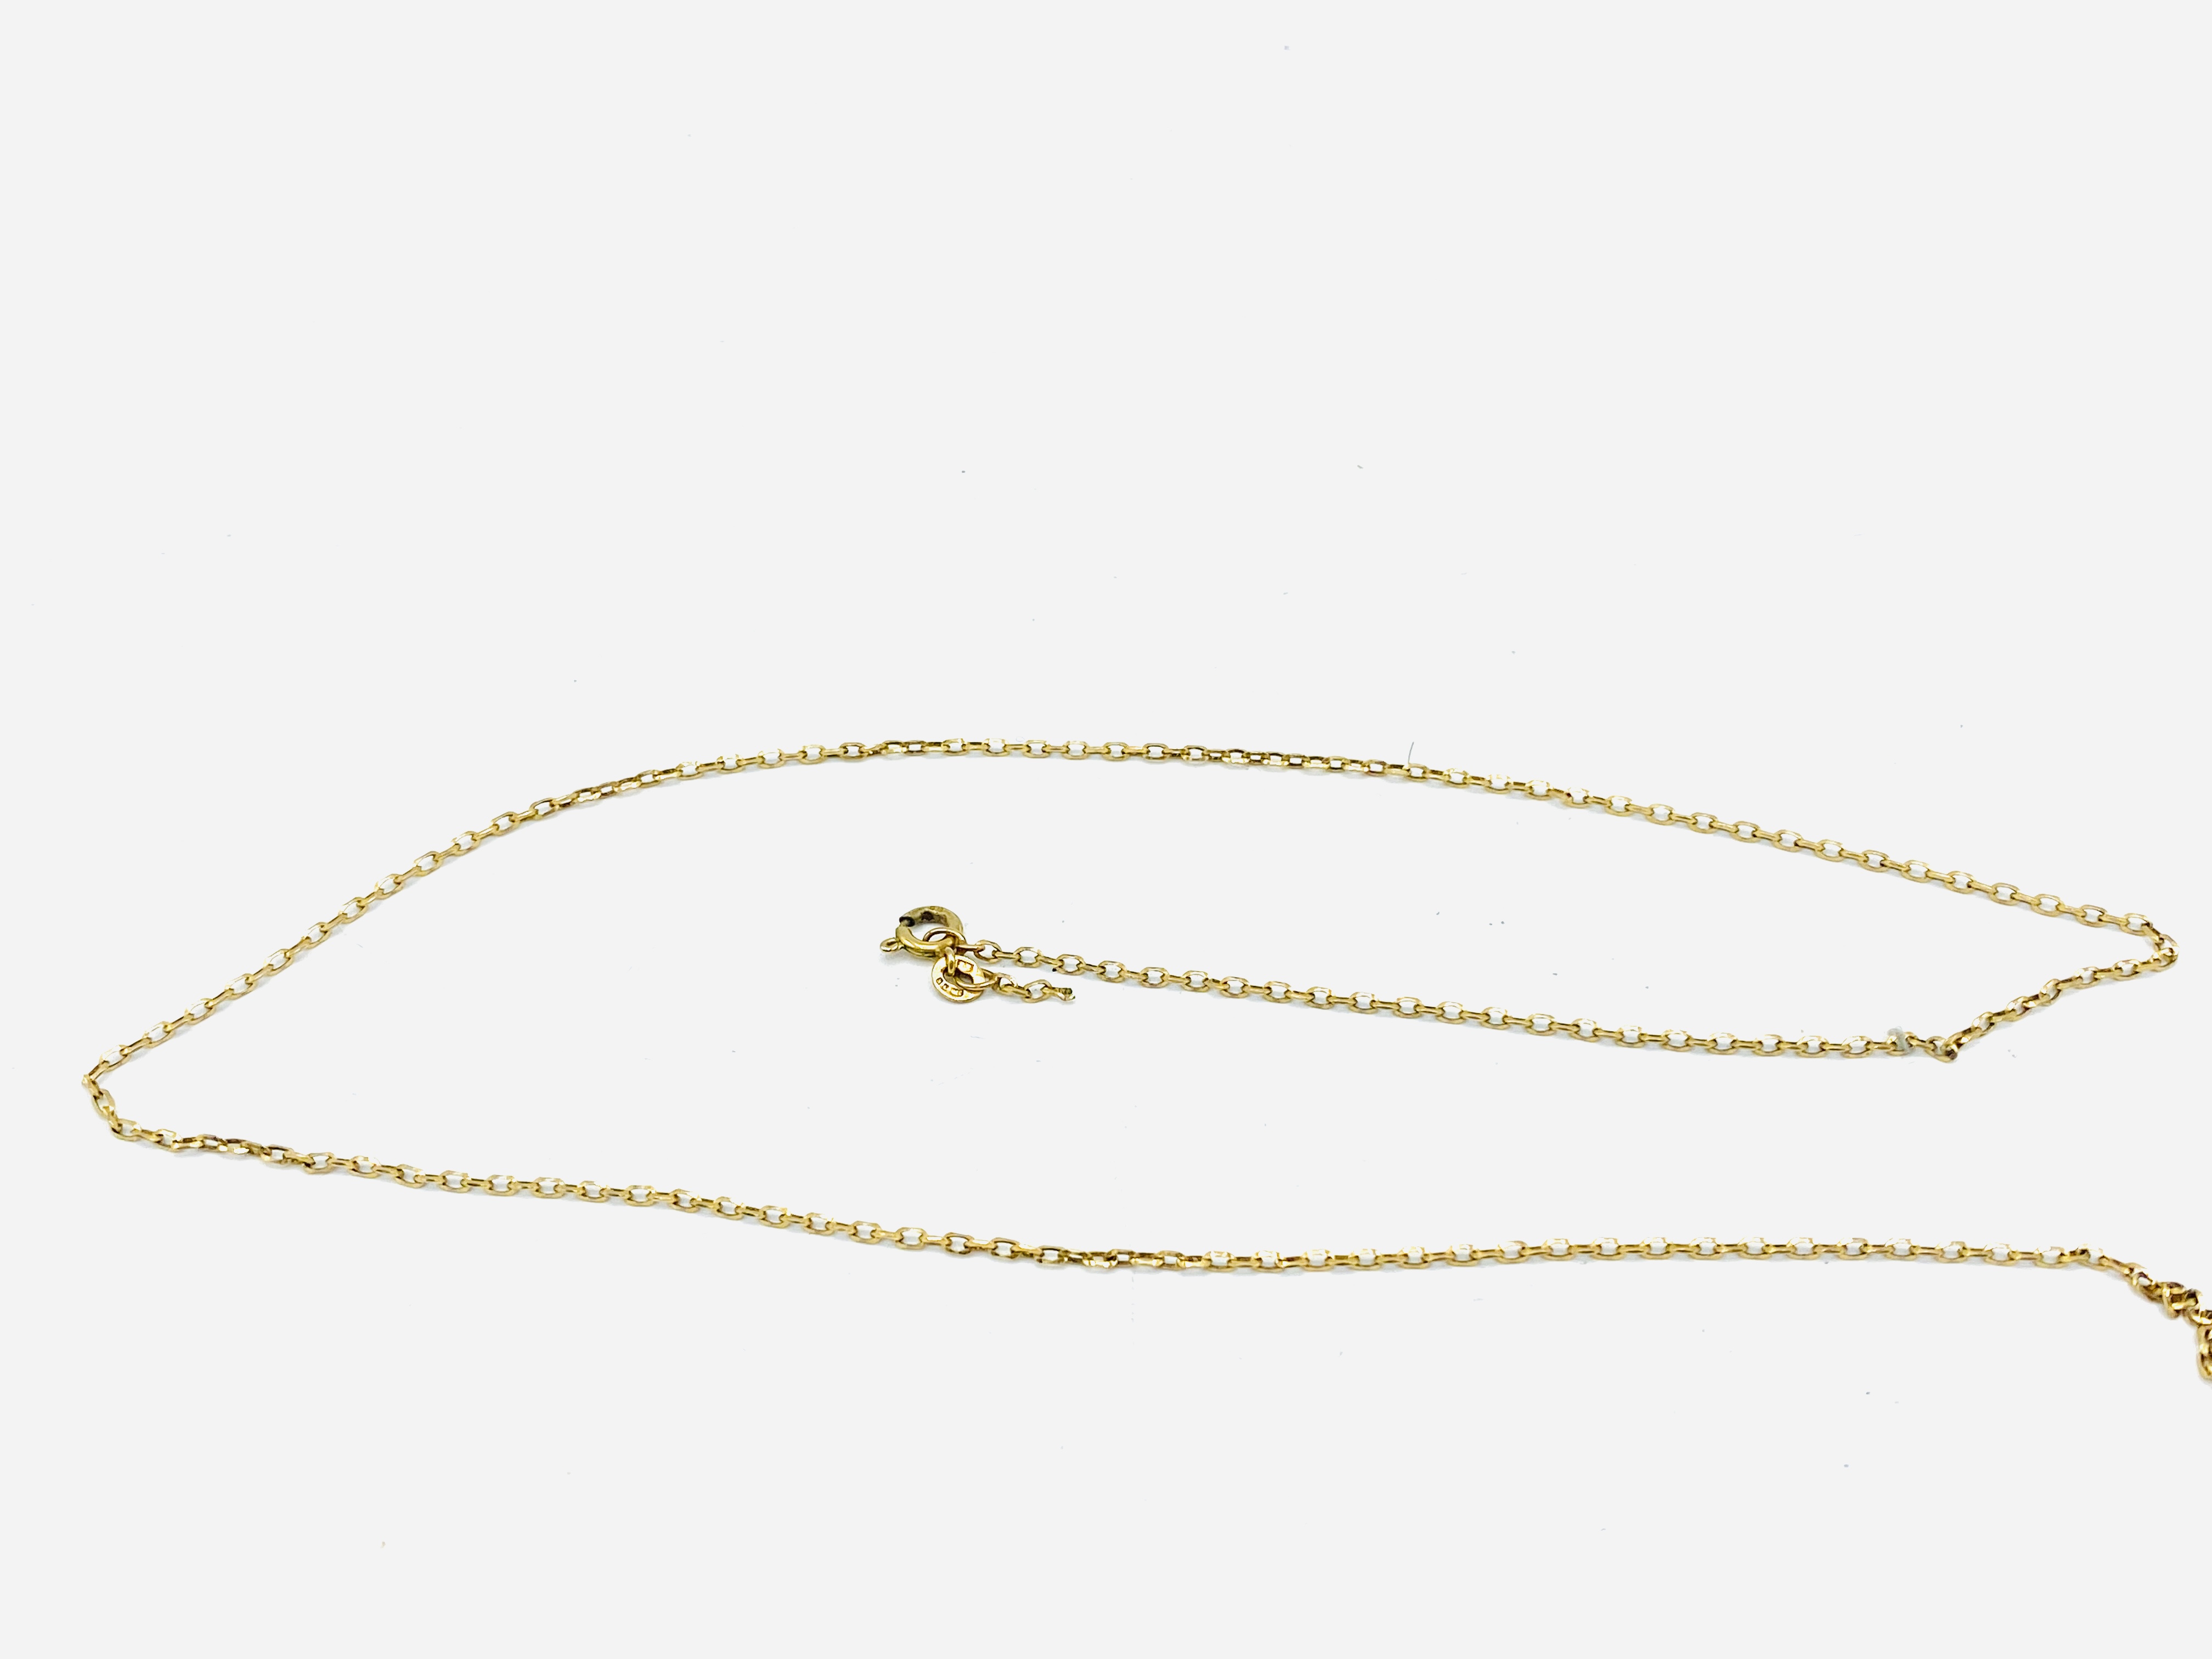 9ct gold and diamond necklace; together with a 9ct gold chain - Image 3 of 4